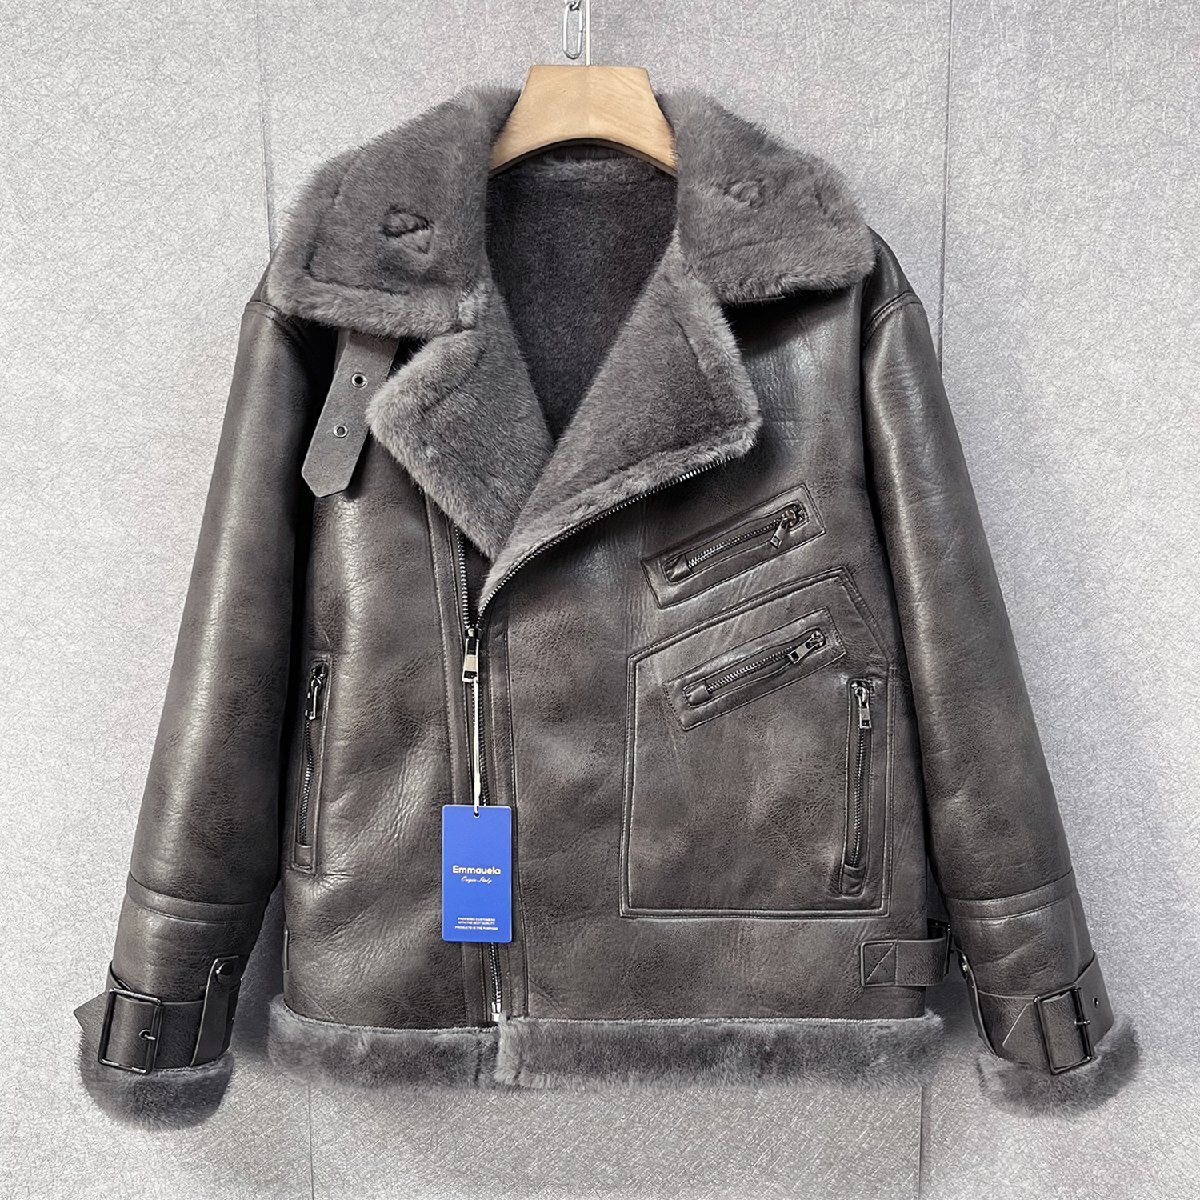  gorgeous * leather jacket regular price 8 ten thousand *Emmauela* Italy * milano departure *boma- high class sheepskin original leather -ply thickness protection against cold Rider's bike autumn winter 2XL/52 size 